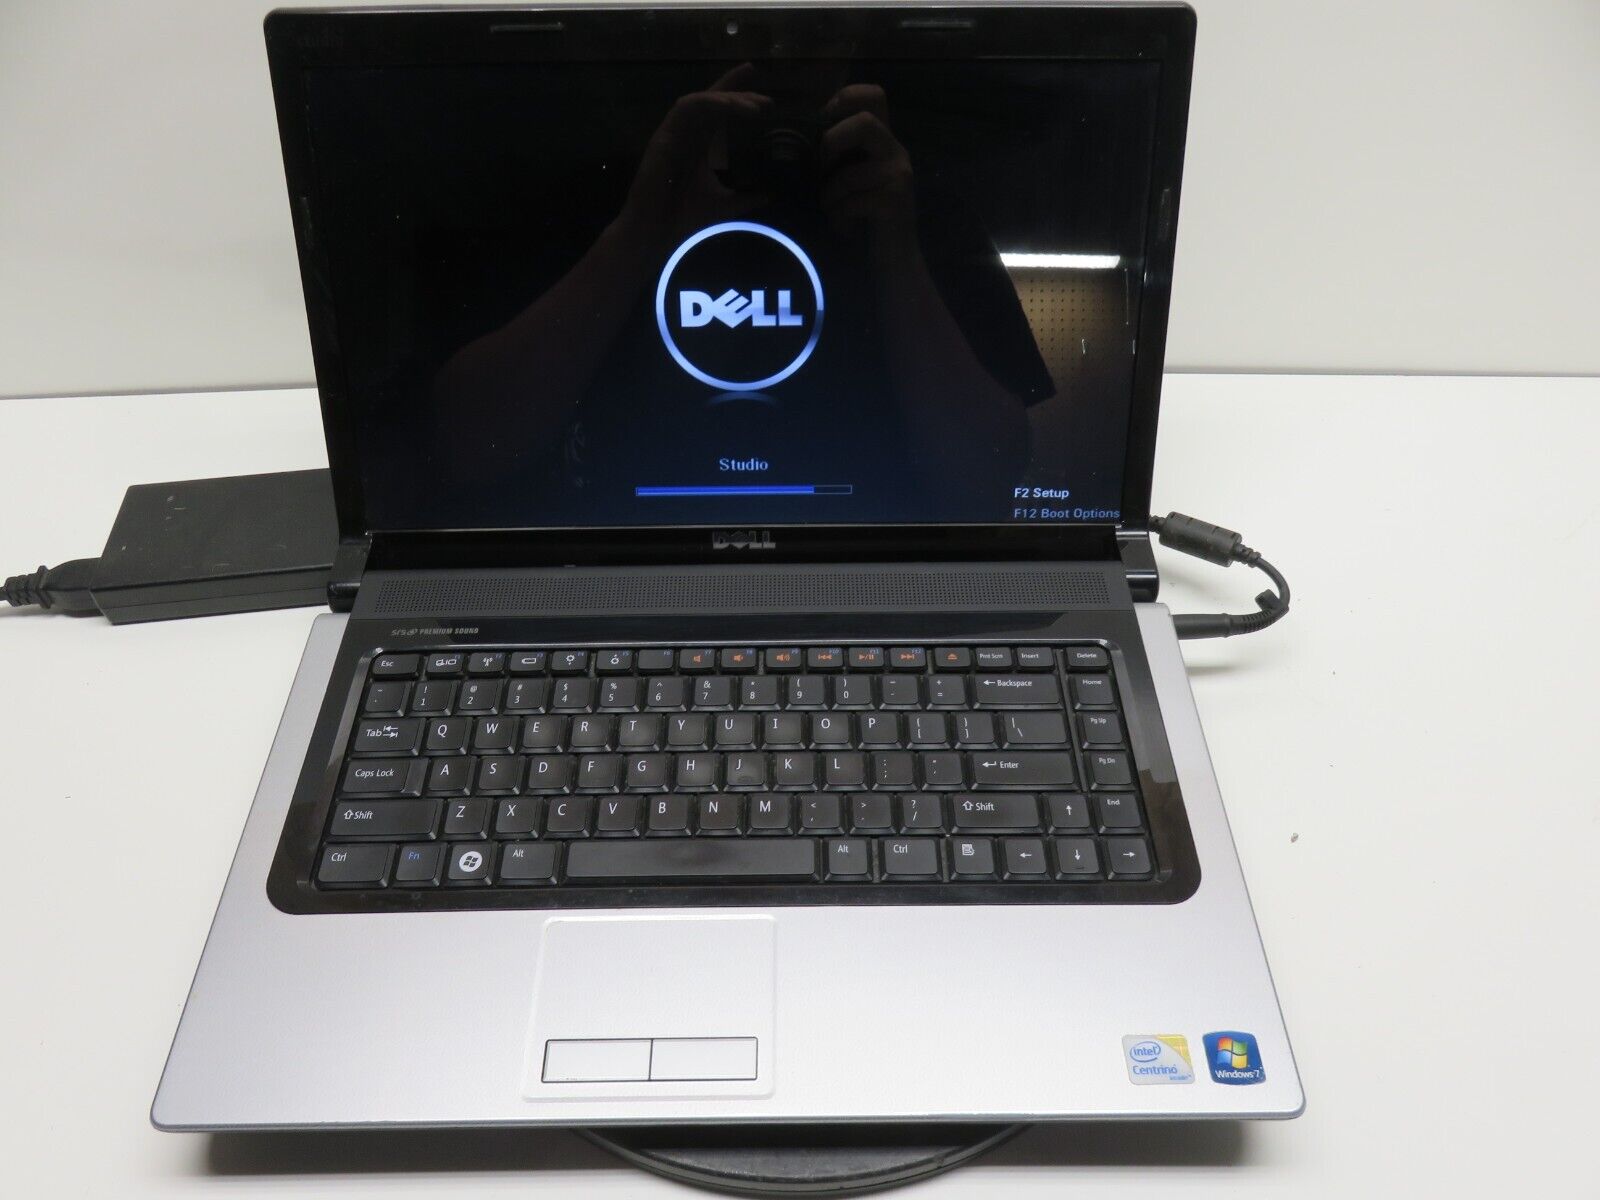 Dell Studio 1555 Laptop Intel Core 2 Duo T6600 4GB Ram No HDD or Battery